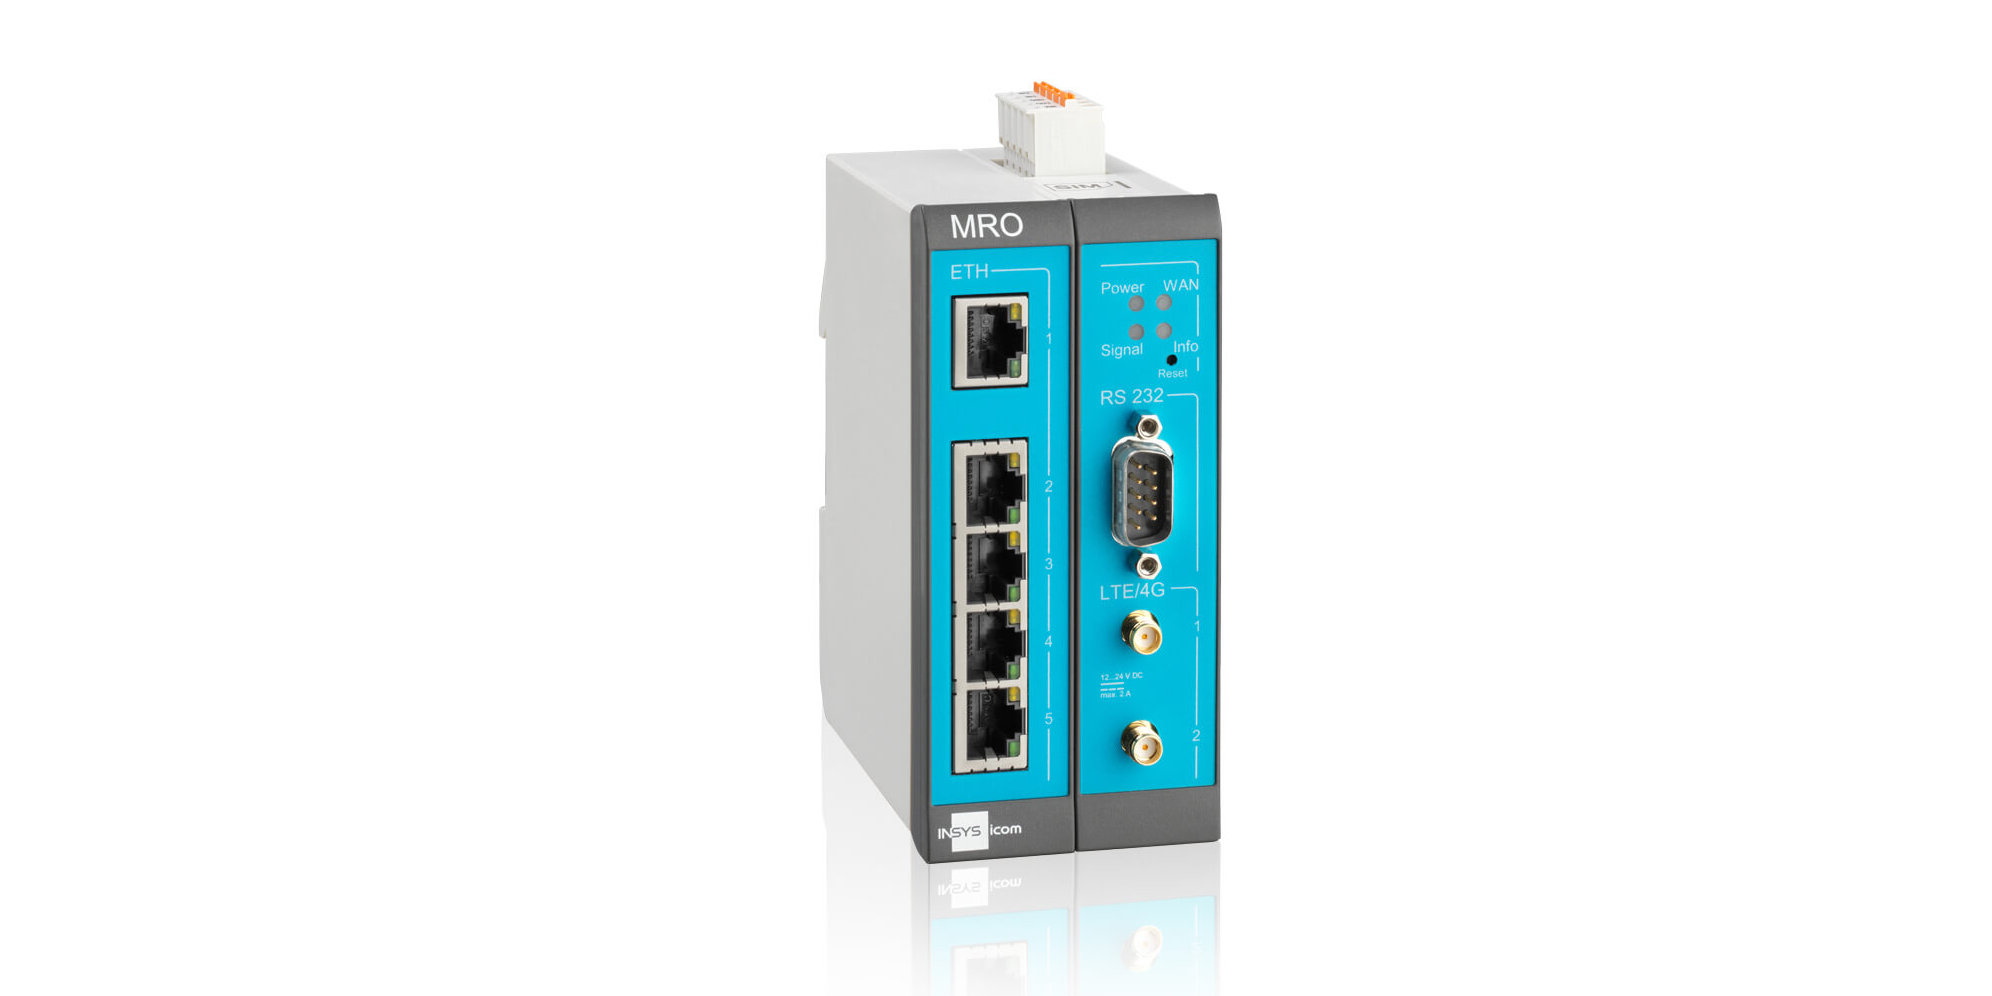 VPN router MRO becomes MRX2 LTES: New name, same functionality